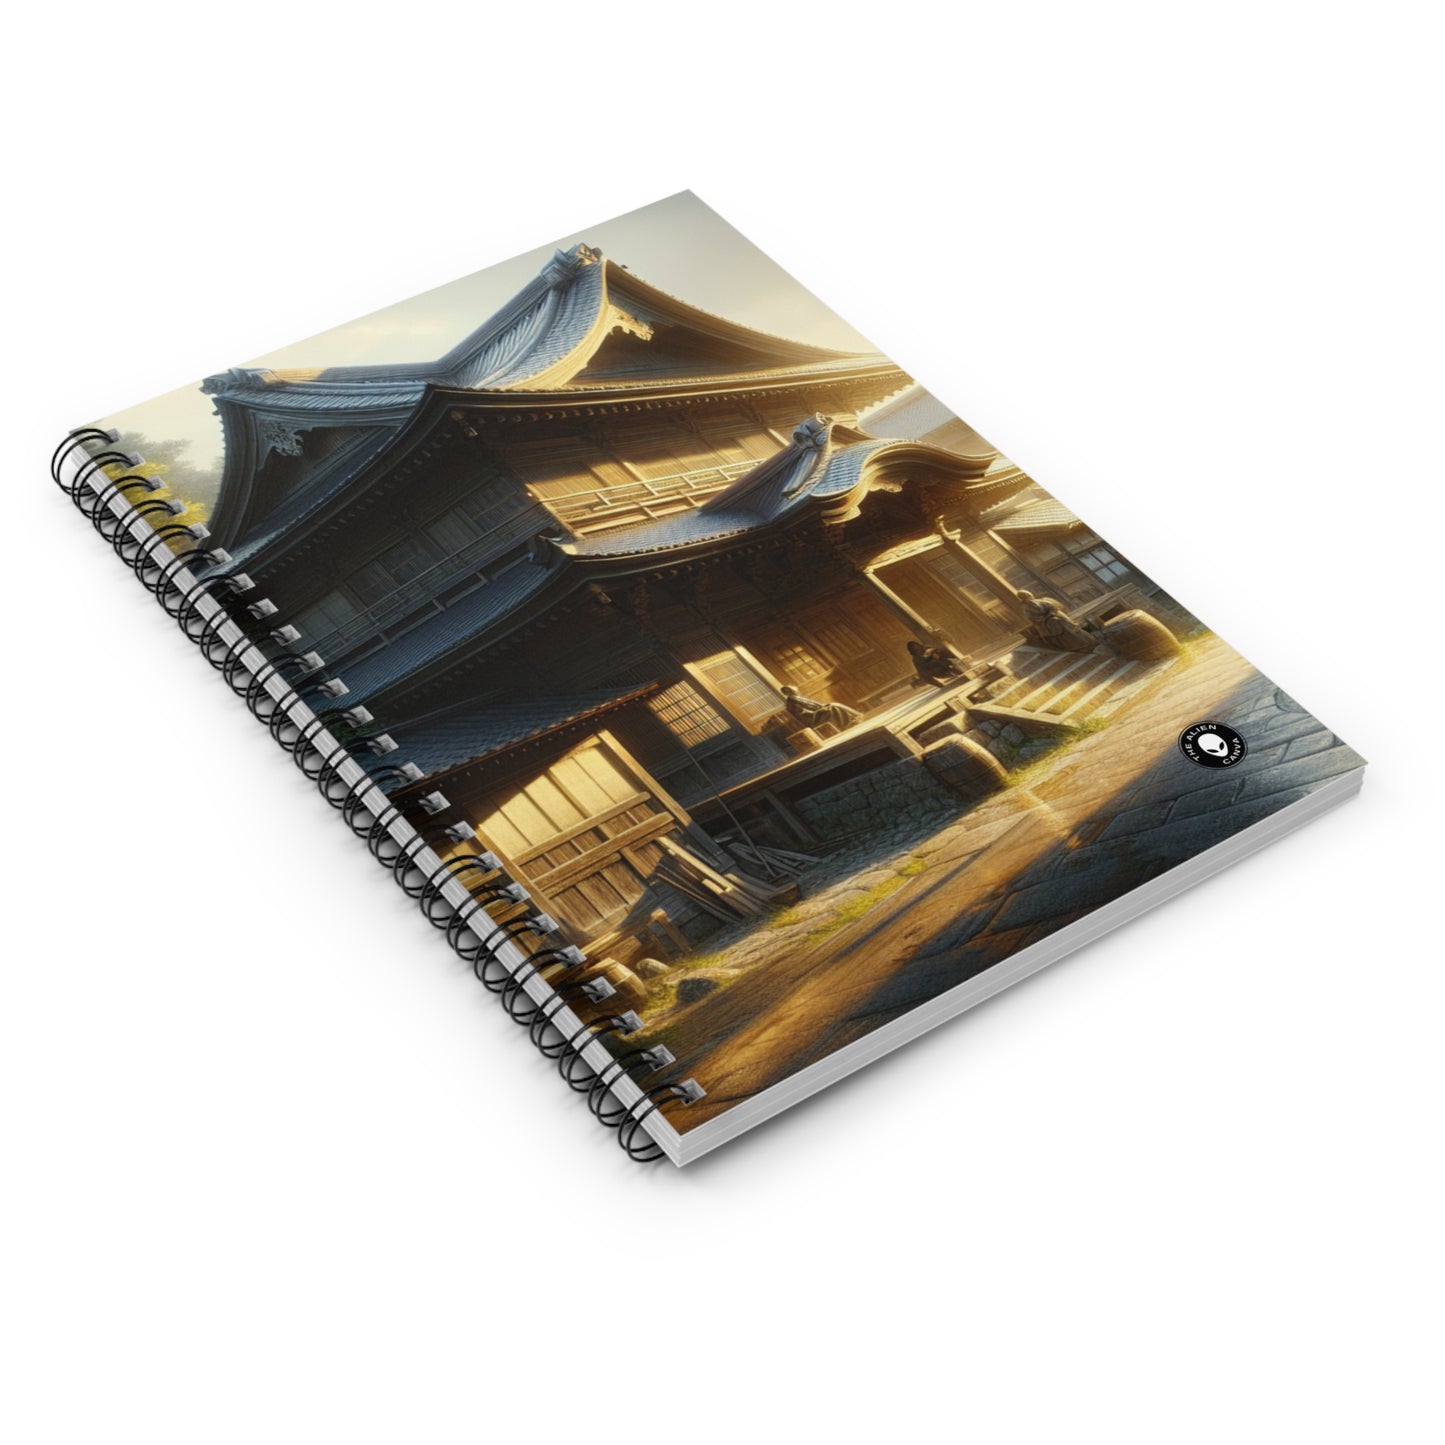 "Golden Hour Bliss: Photographic Realism Landscape" - The Alien Spiral Notebook (Ruled Line) Photographic Realism